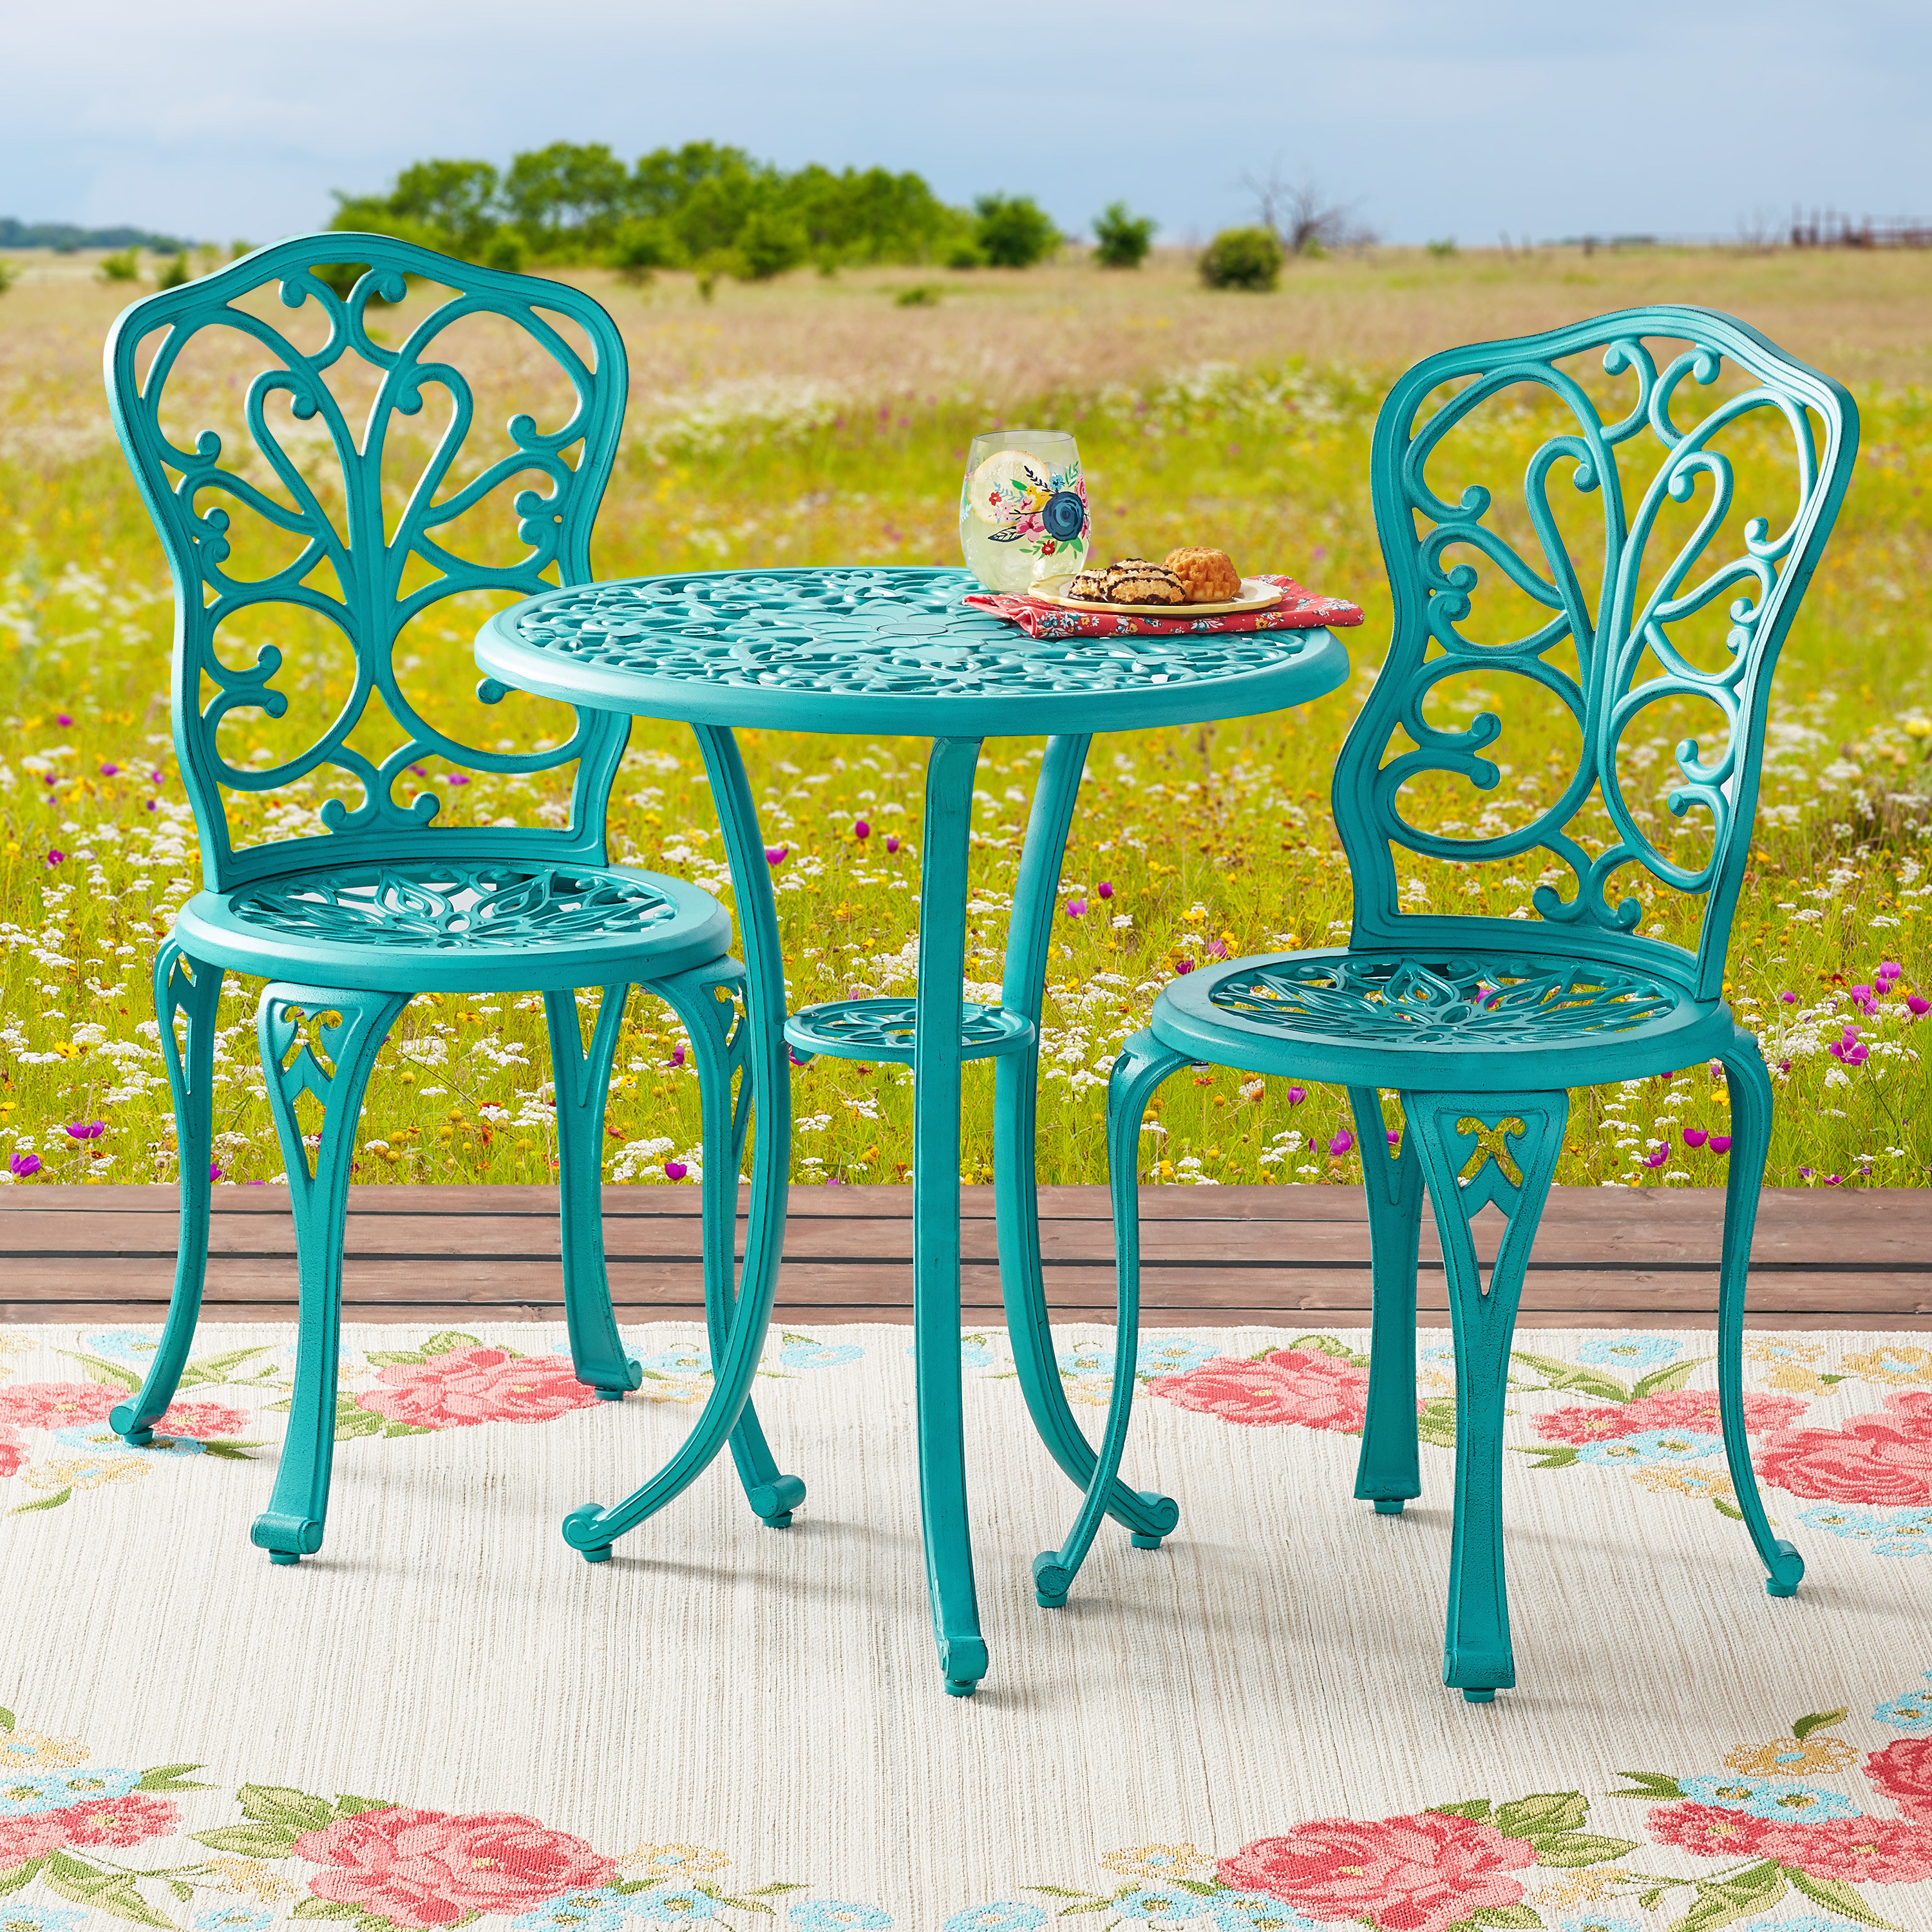 teal ornate cast iron small round table and two chairs